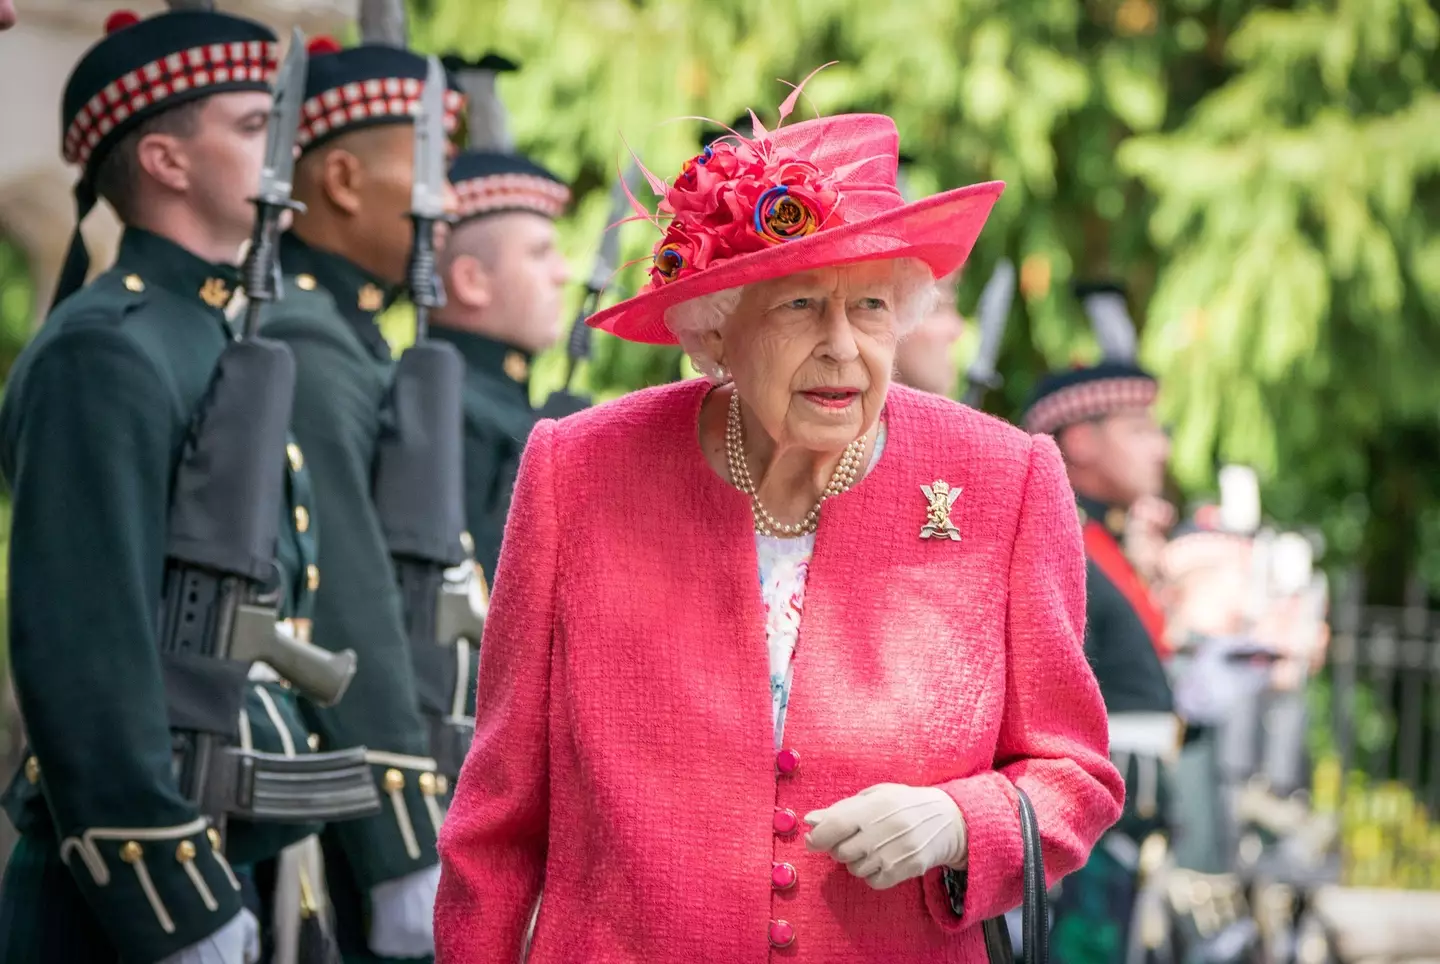 A petition is calling for a permanent Bank Holiday to honour the Queen.